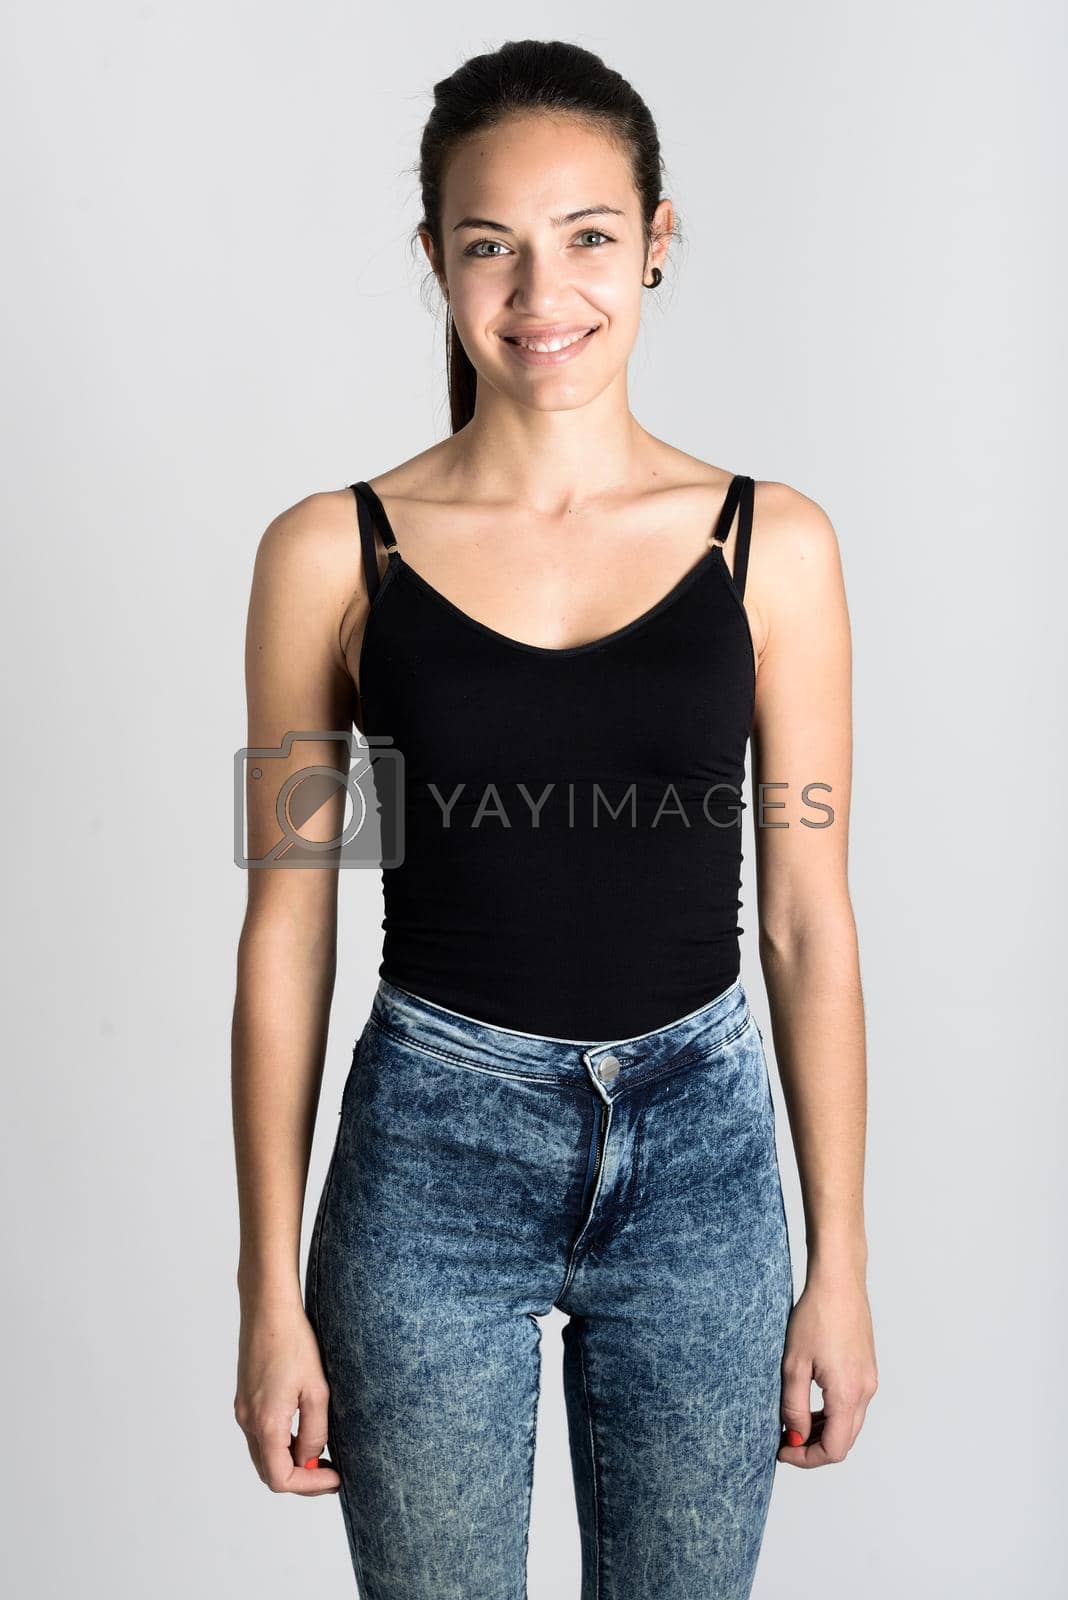 Royalty free image of Young woman wearing black tank top and blue jeans by javiindy